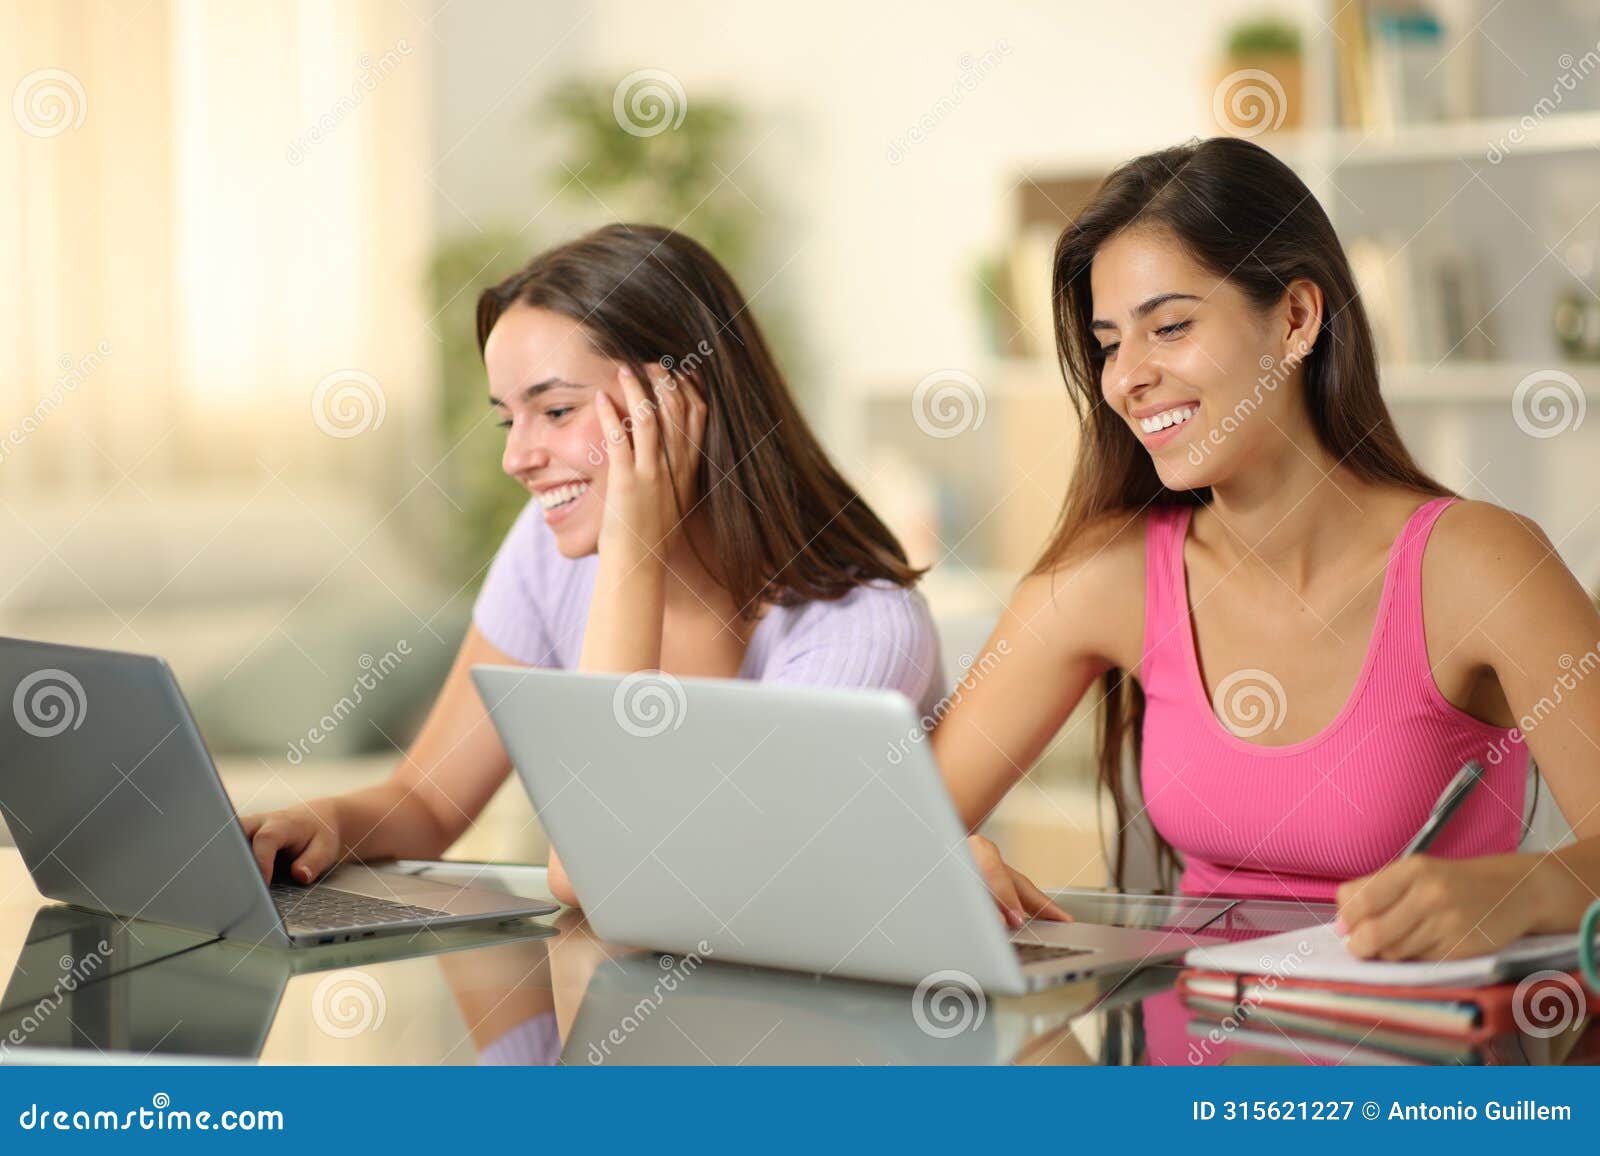 happy students learning online at home